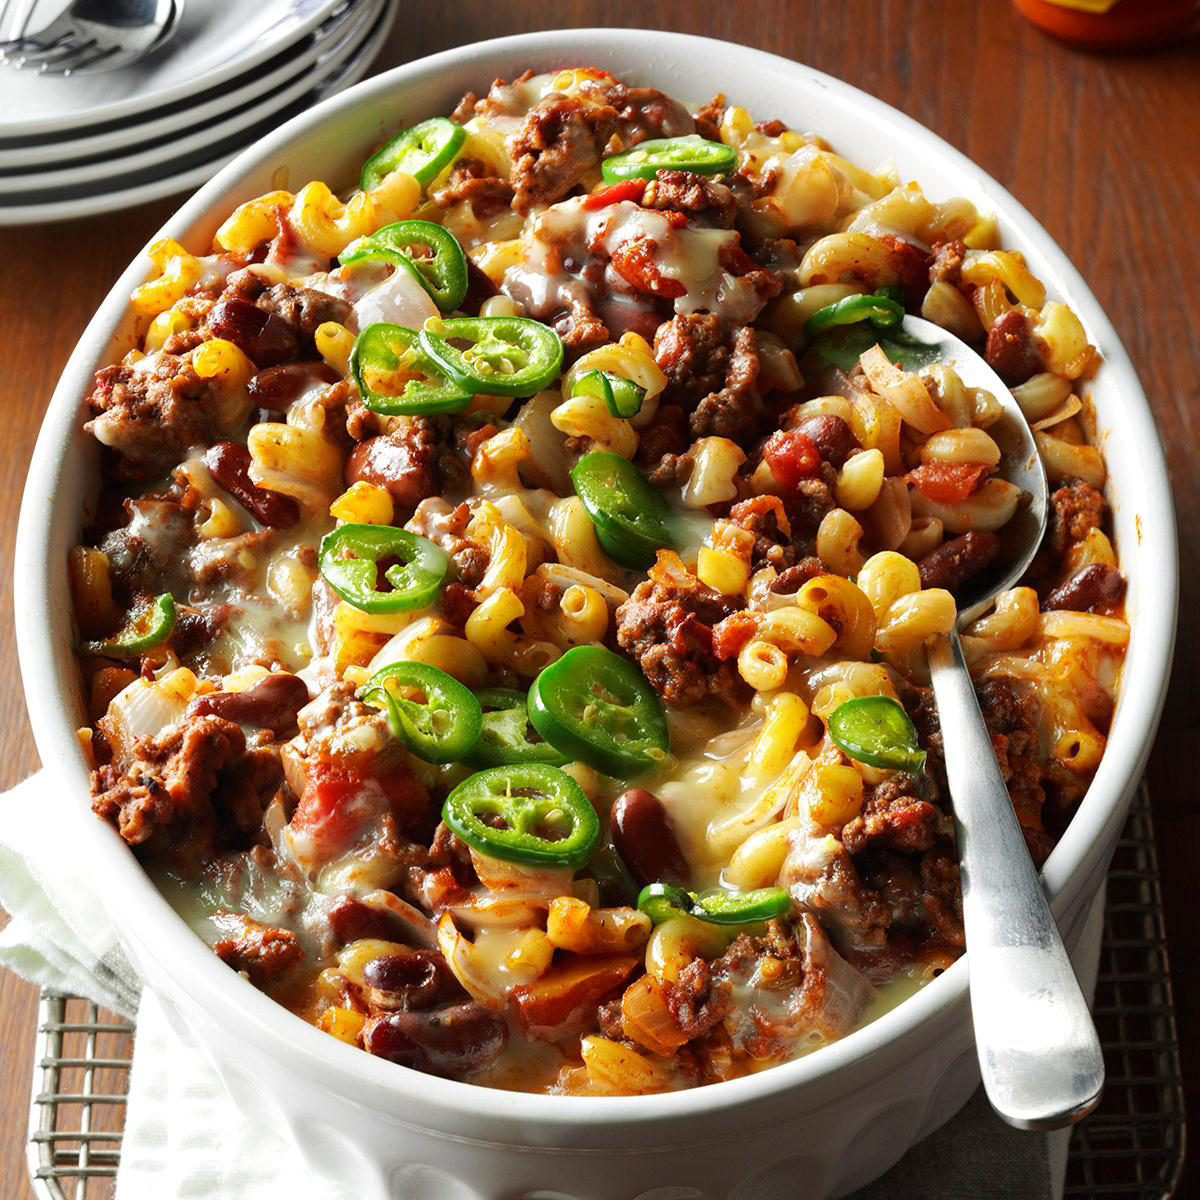 50 Healthy Casseroles That Are Incredibly Delicious